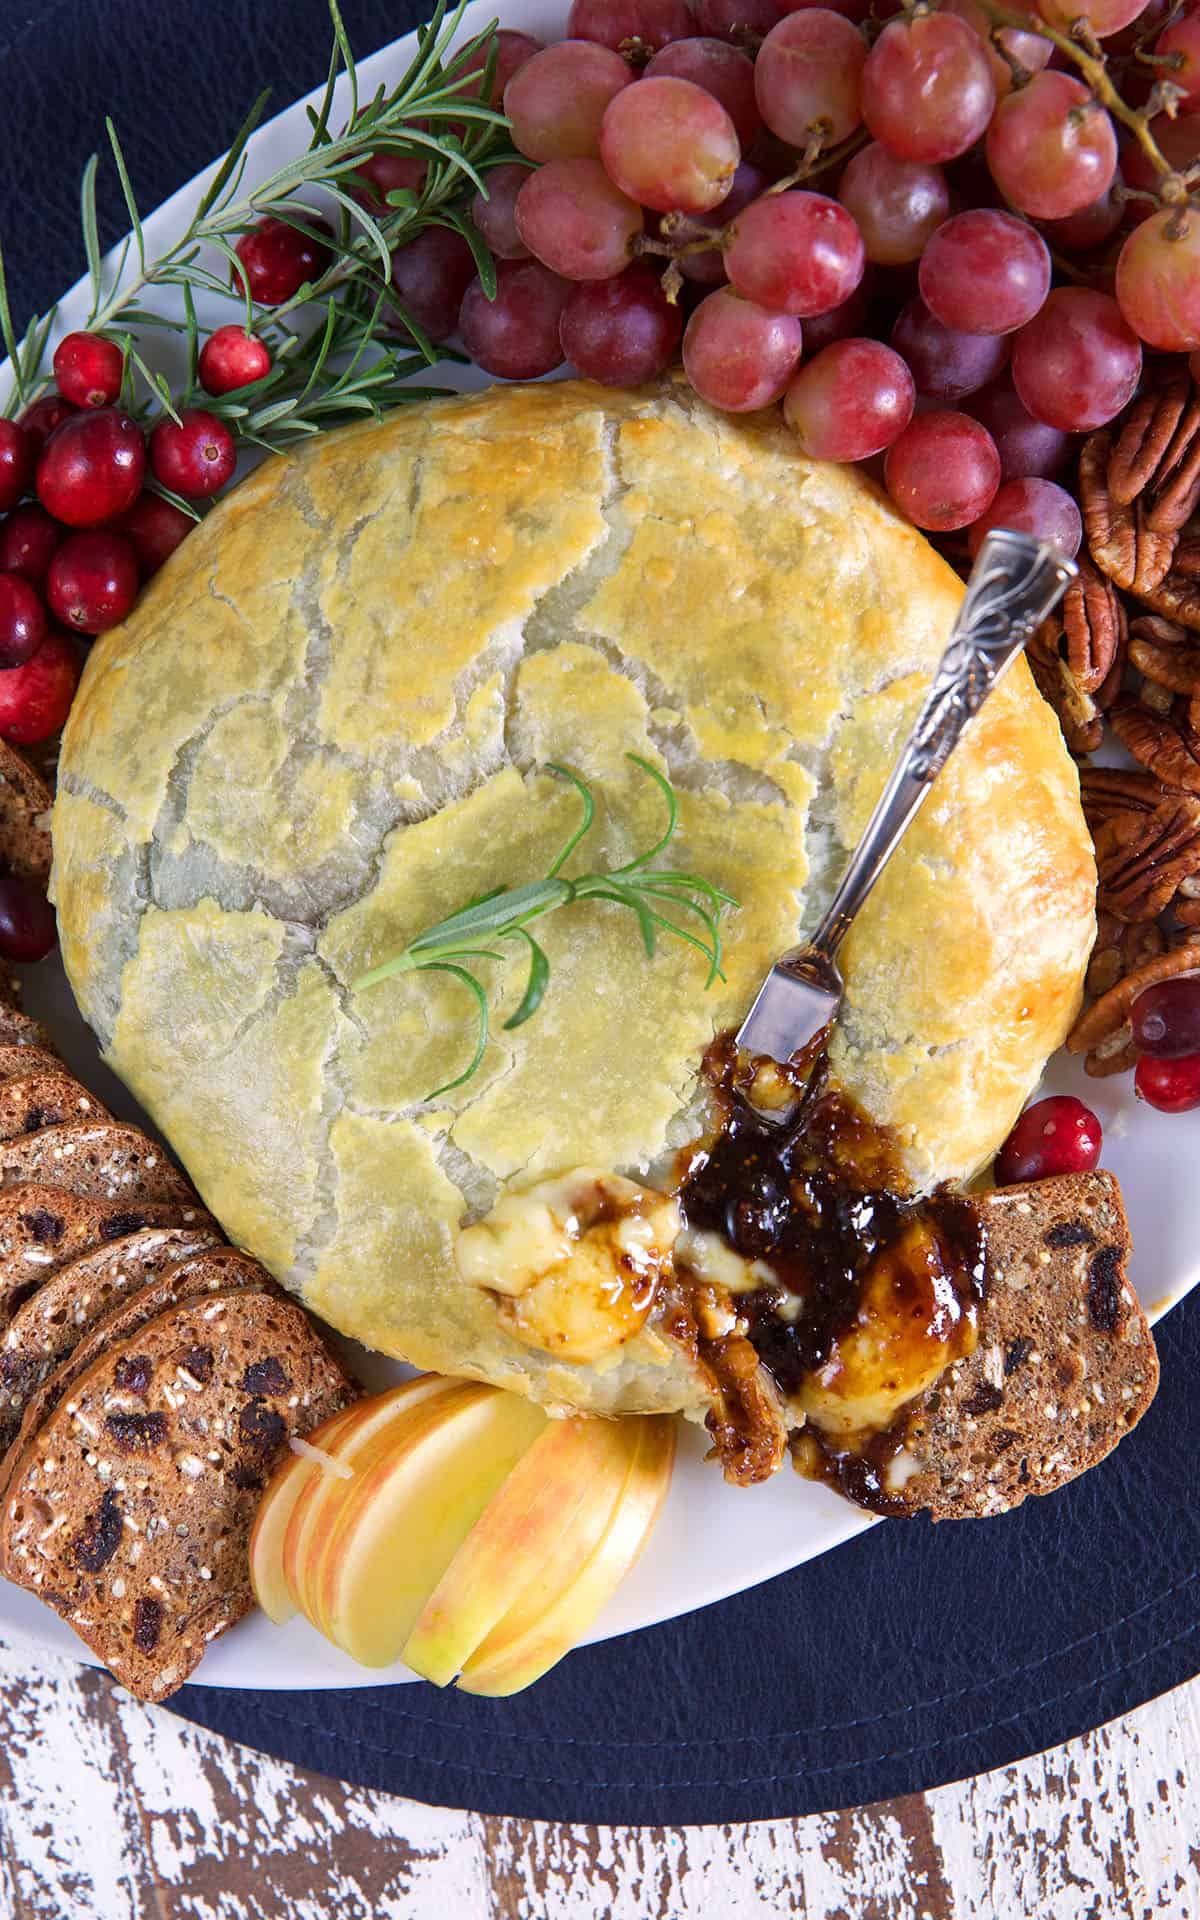 A baked wheel of brie is surrounded by grapes, bread, and more.